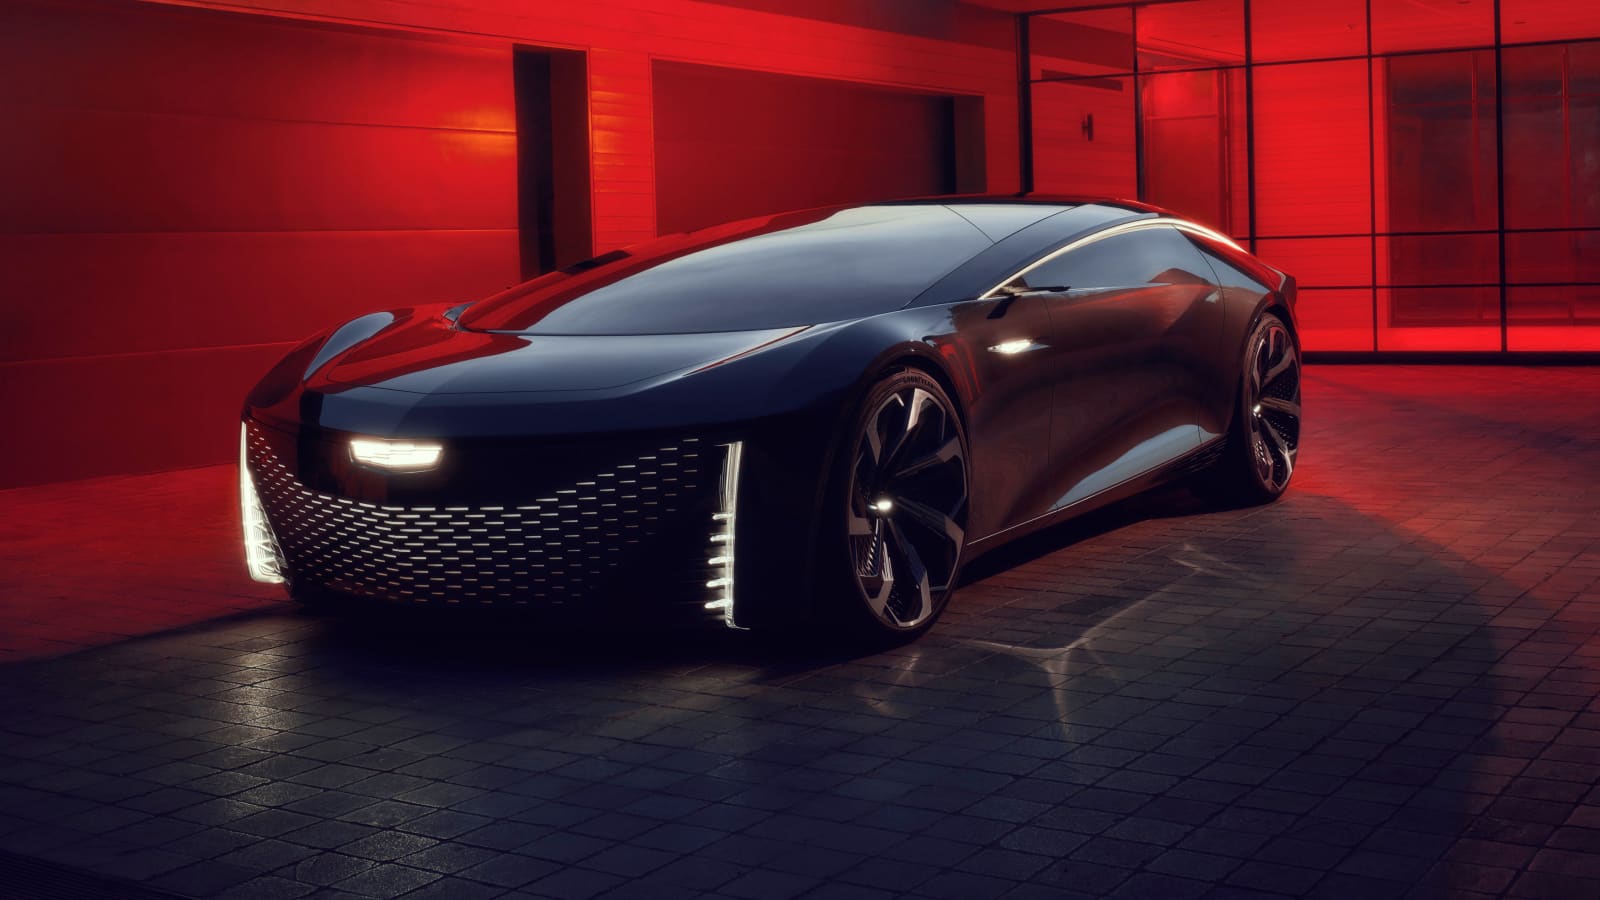 GM unveils new self-driving Cadillac concept vehicle